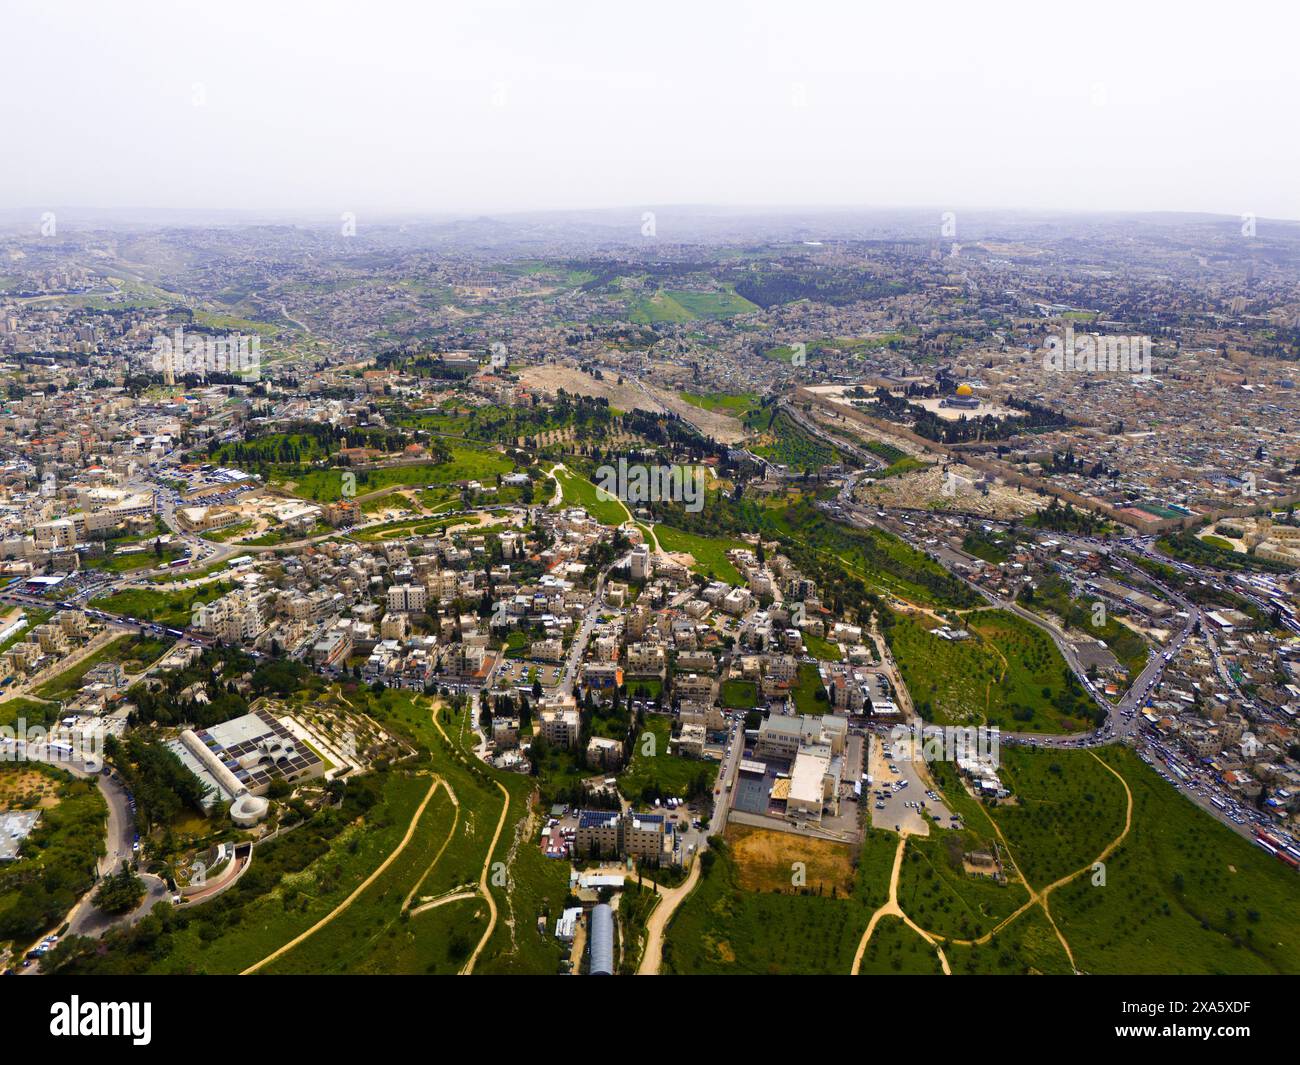 Aerial view of Jerusalem, Israel, featuring the iconic Temple Mount, Kidron Valley, and Mount of Olives. Stock Photo